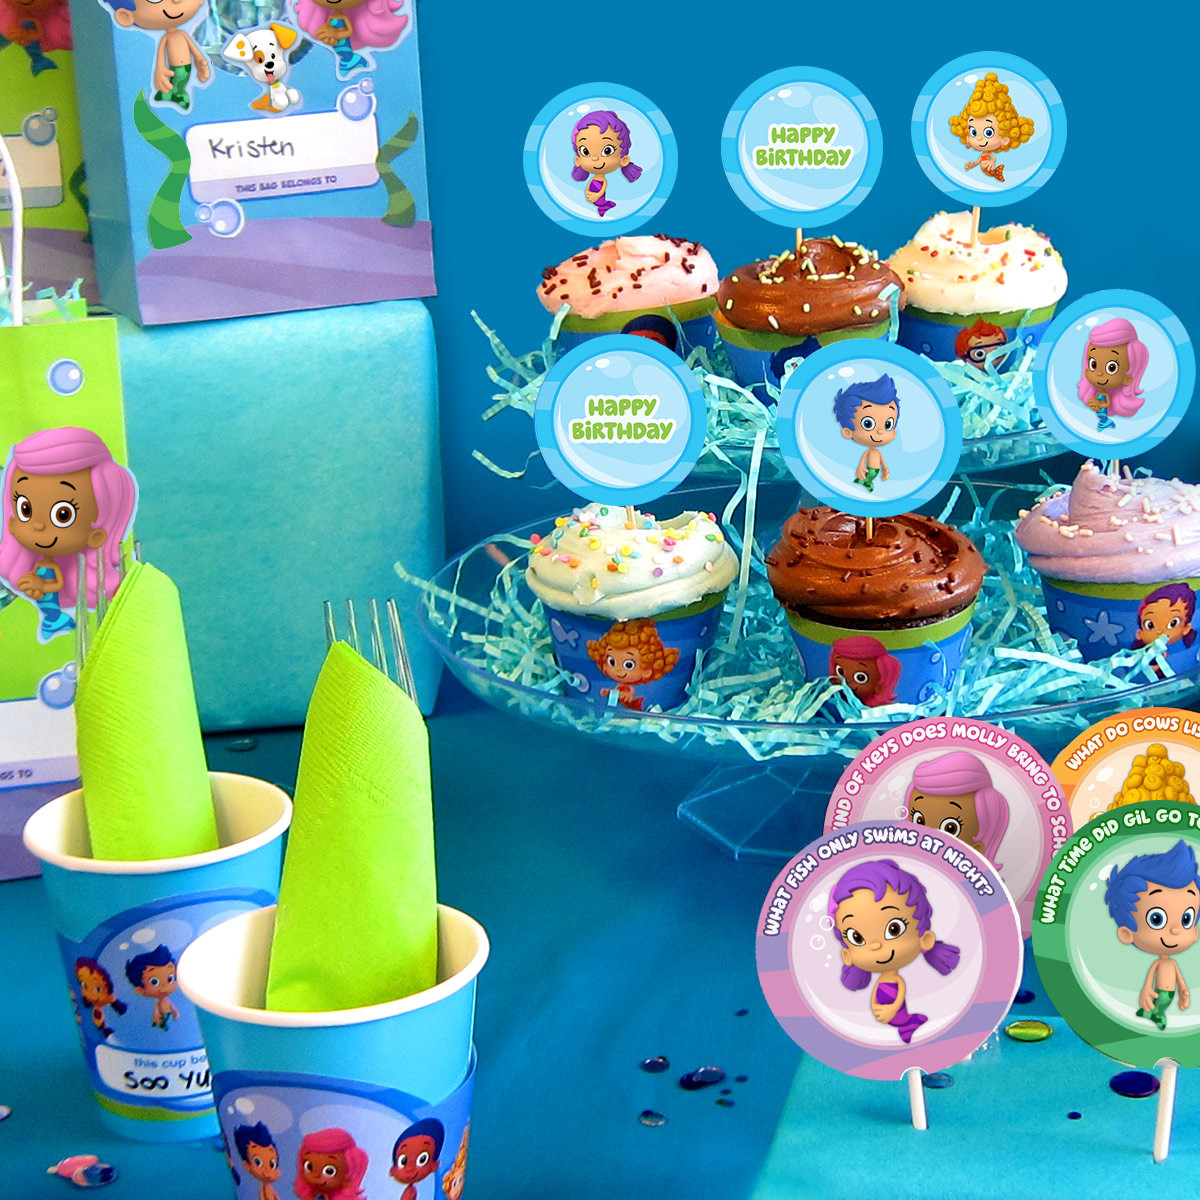 Bubble Guppies Birthday Party Supplies
 Bubble Guppies Party Day Planner